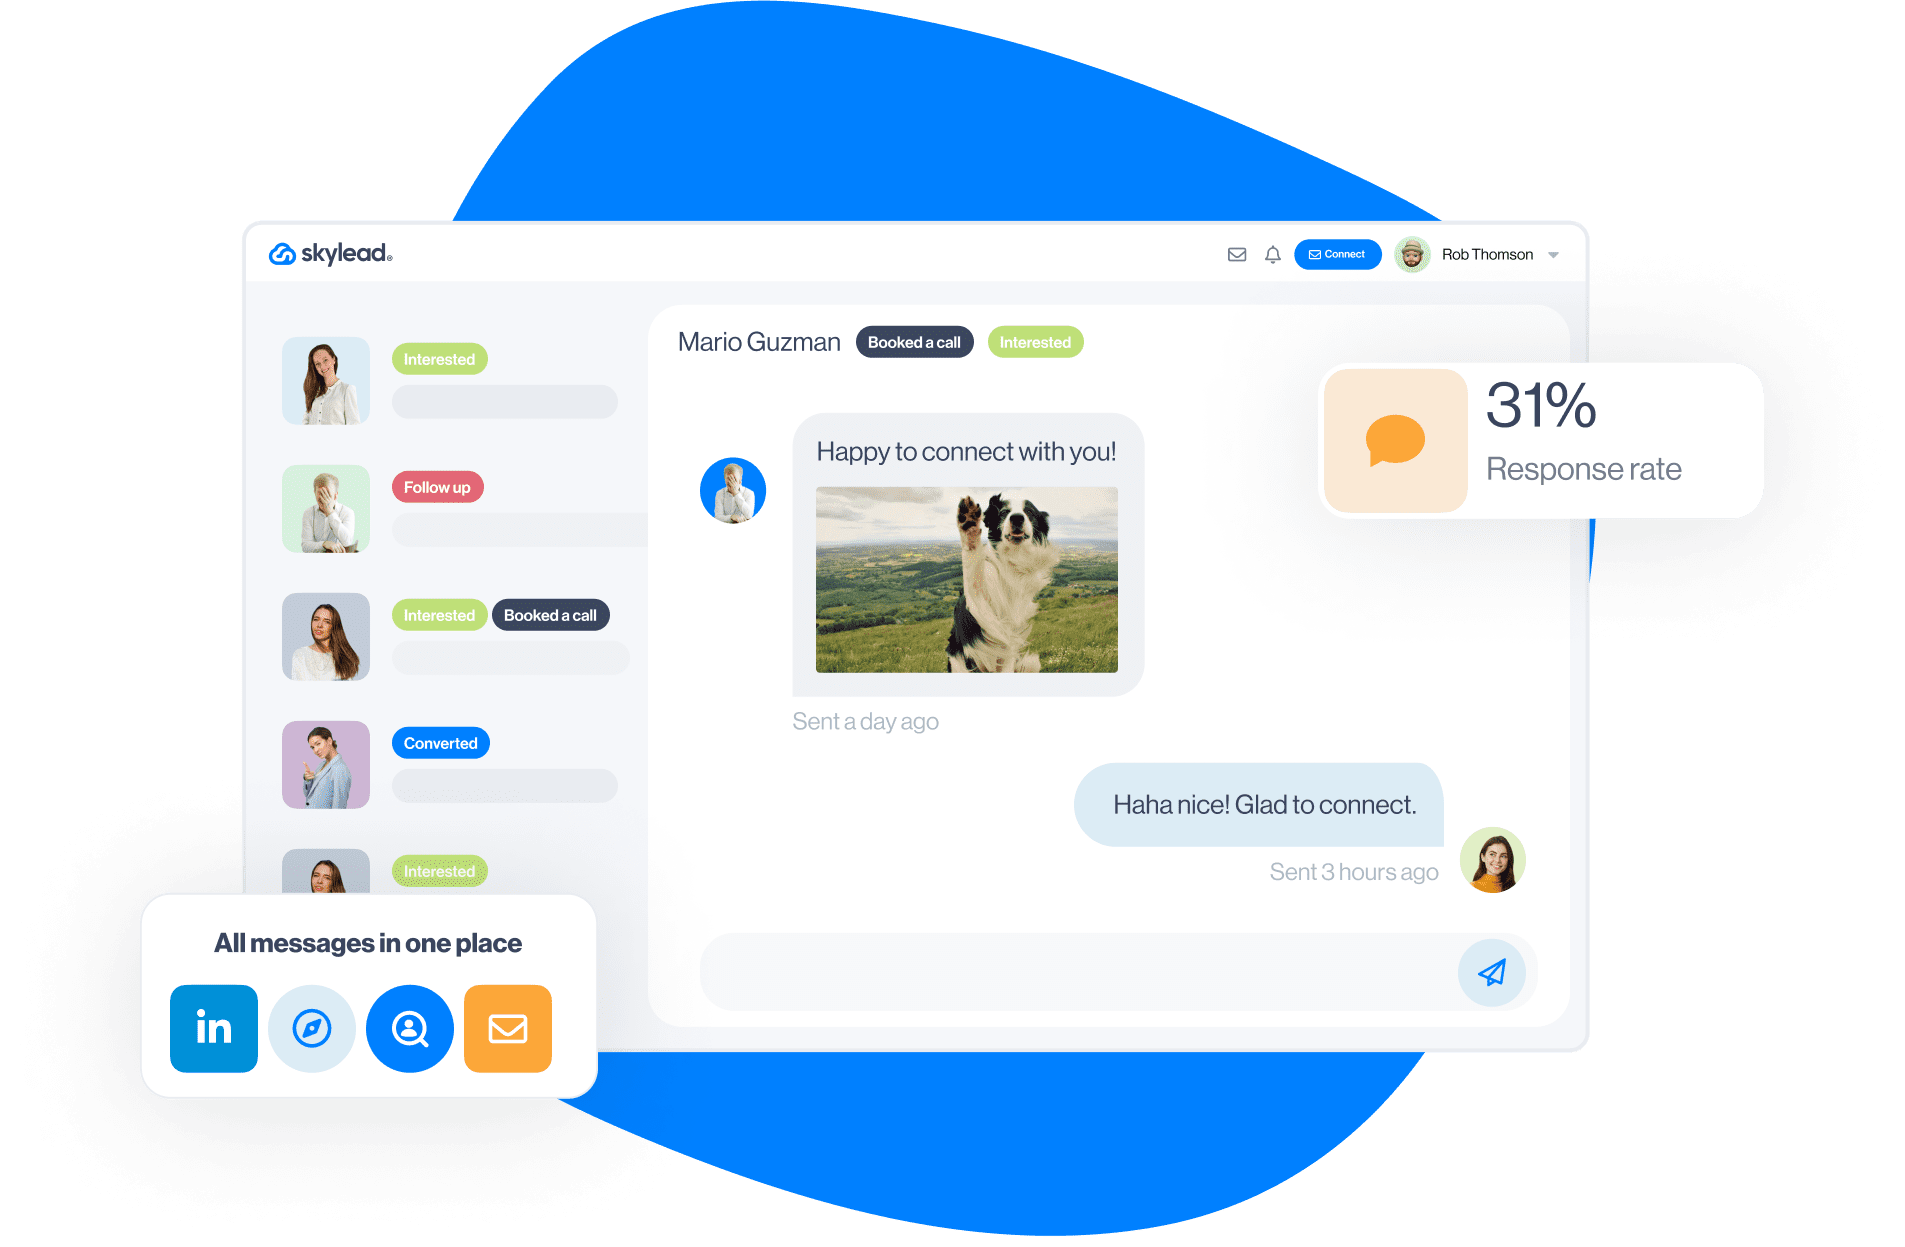 Image of Skylead Smart Inbox with messages integrations box with logos of LinkedIn, Sales Navigator, Recruiter and email along with the card of conversion results - 31% response rate